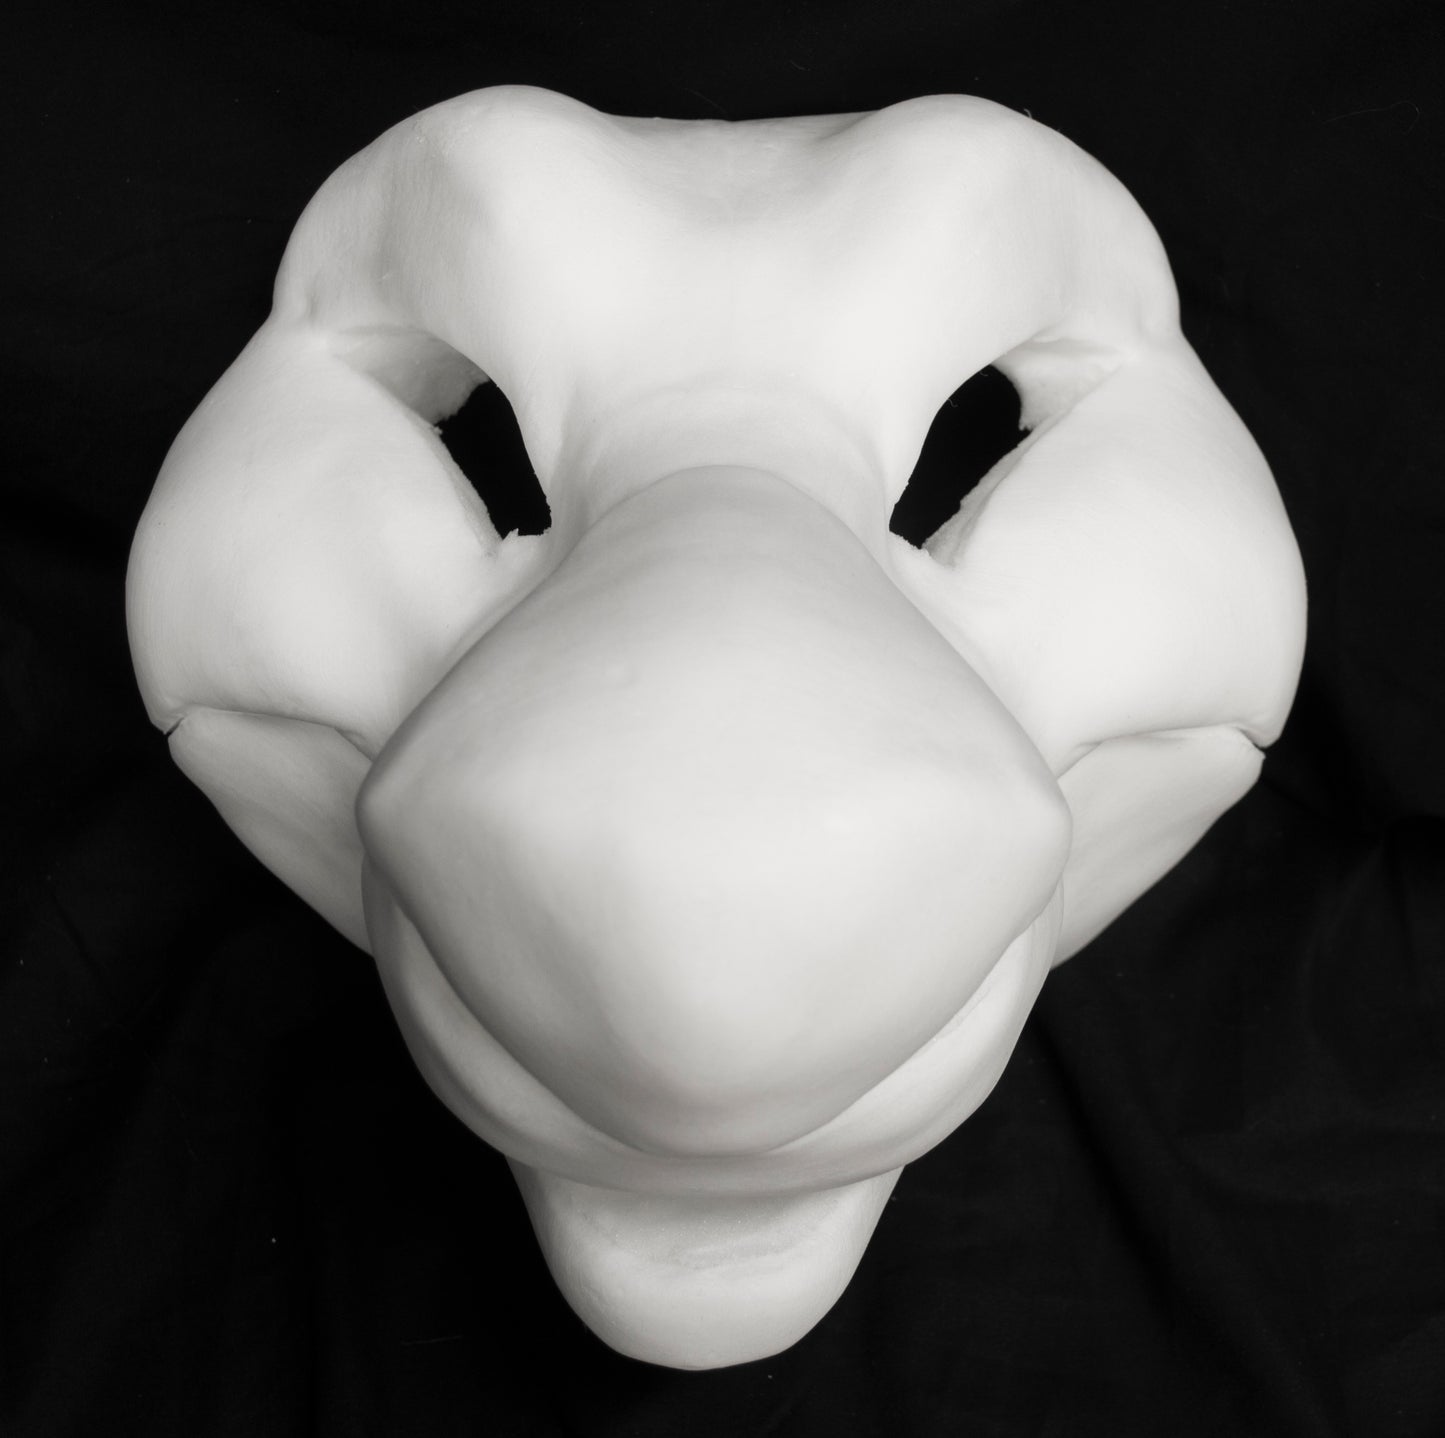 Manokit bundle deal: cut and carved head base, eye mesh, Ears and Feet padding, for costumes mascots and fursuits.